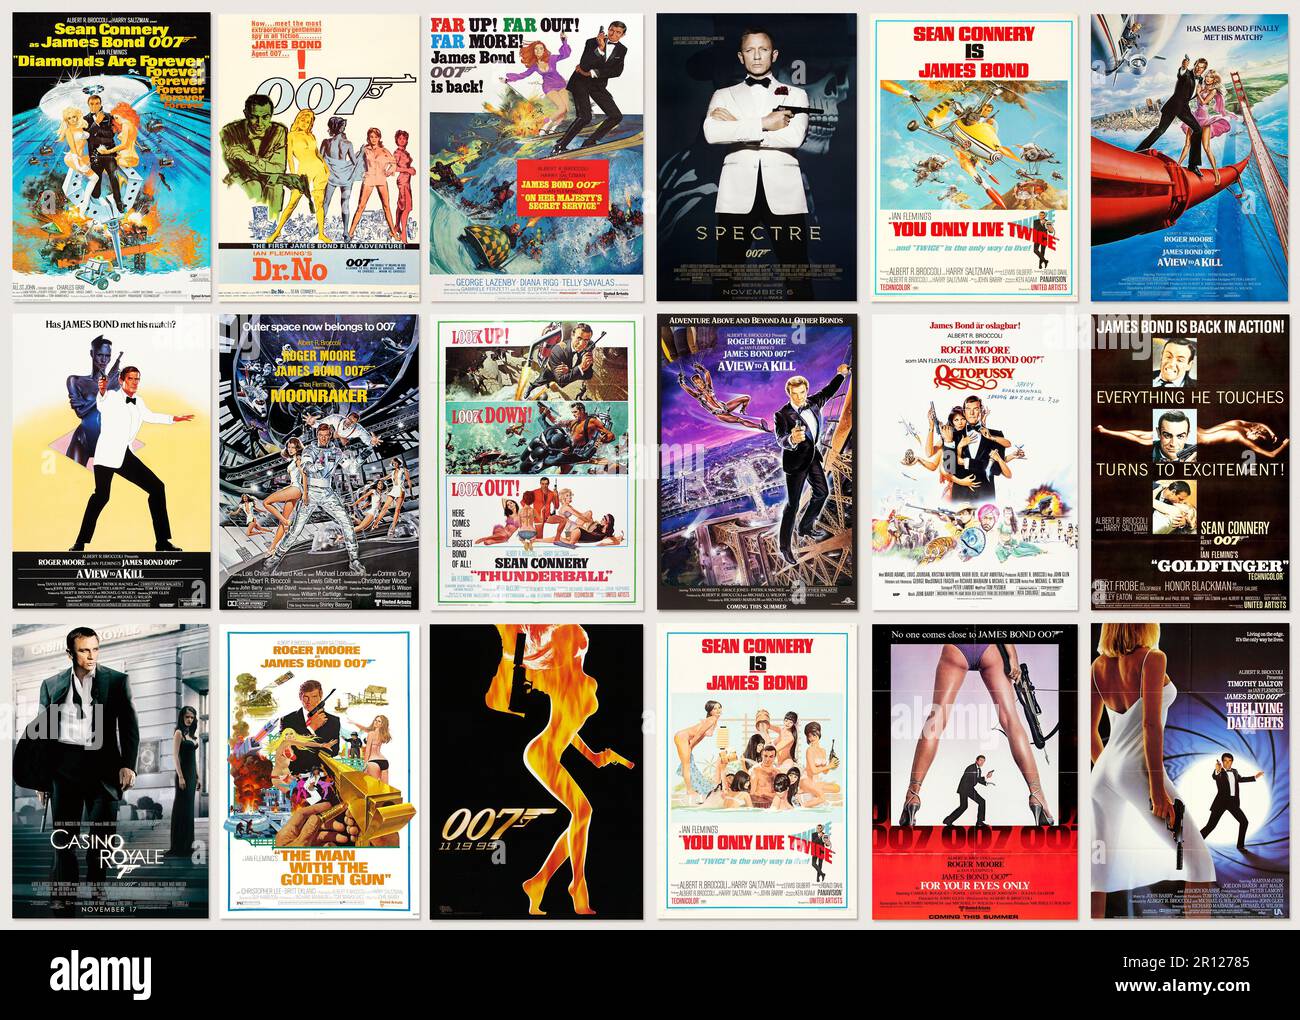 James Bond 007 old retro movie posters, collection of authentic vintage cinema advertising designs Stock Photo